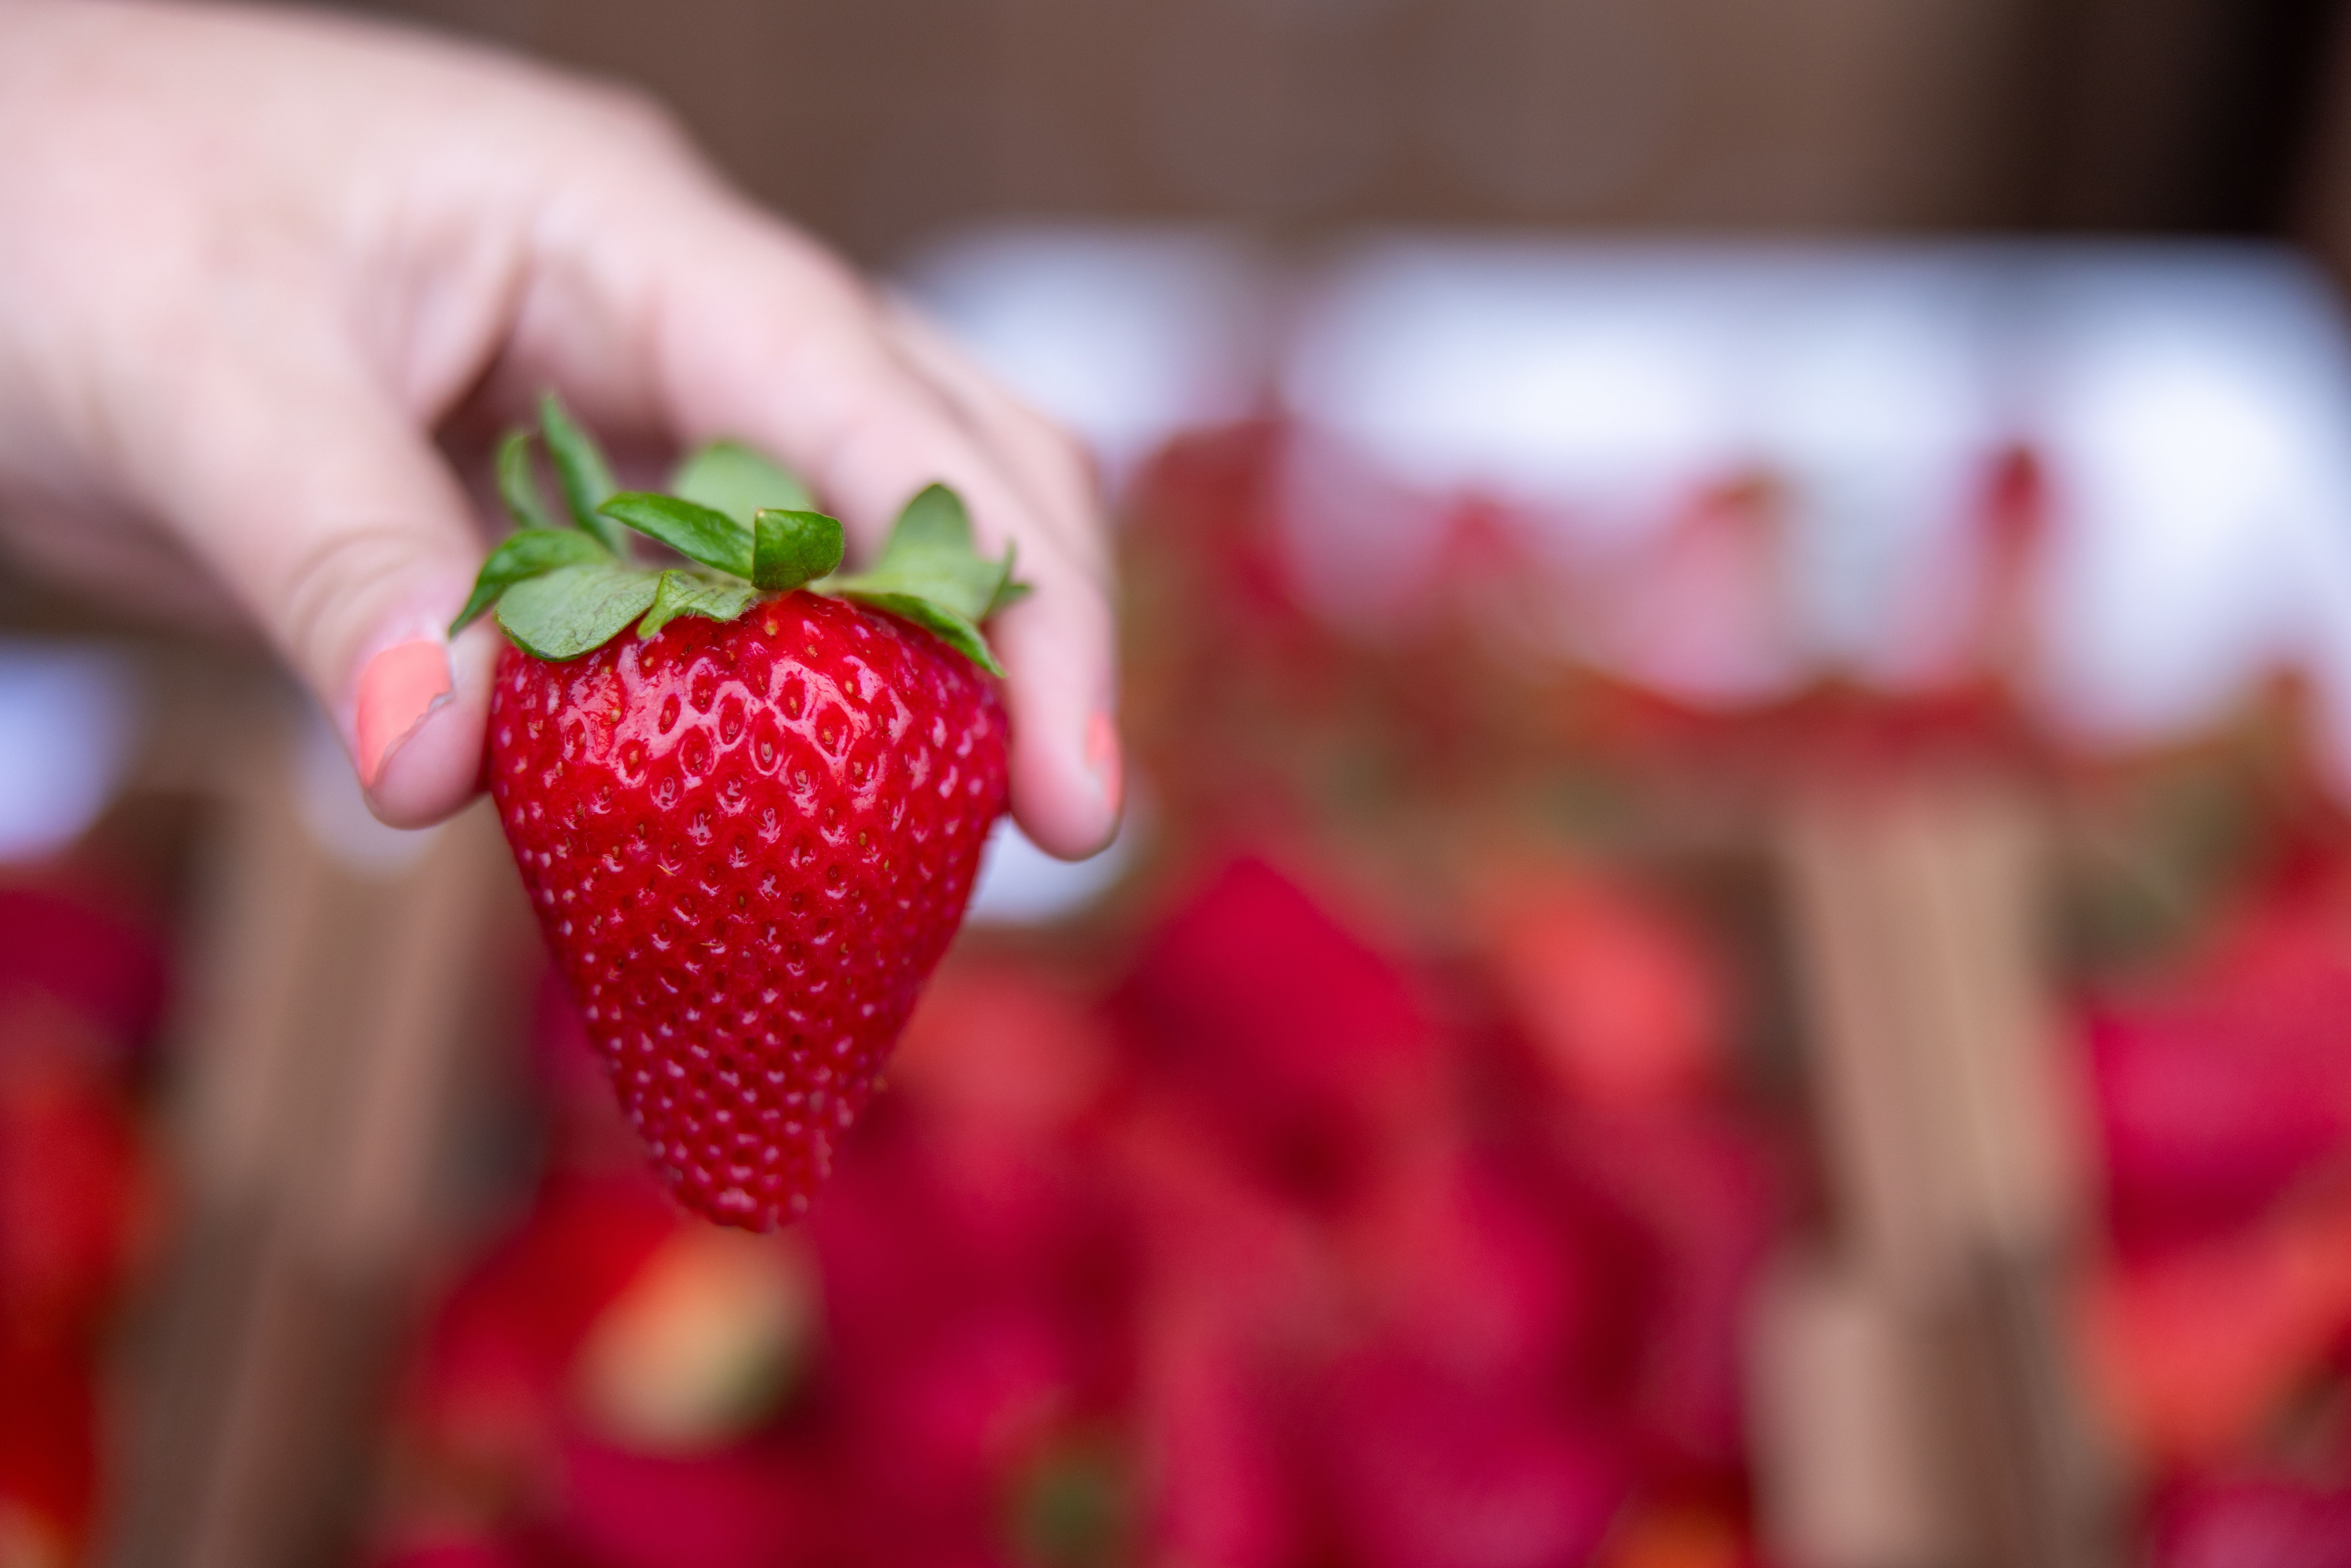 Close-up of a woman's hand holding a luscious looking bright red strawberry, with a pile of red strawberries out of focus in the background.